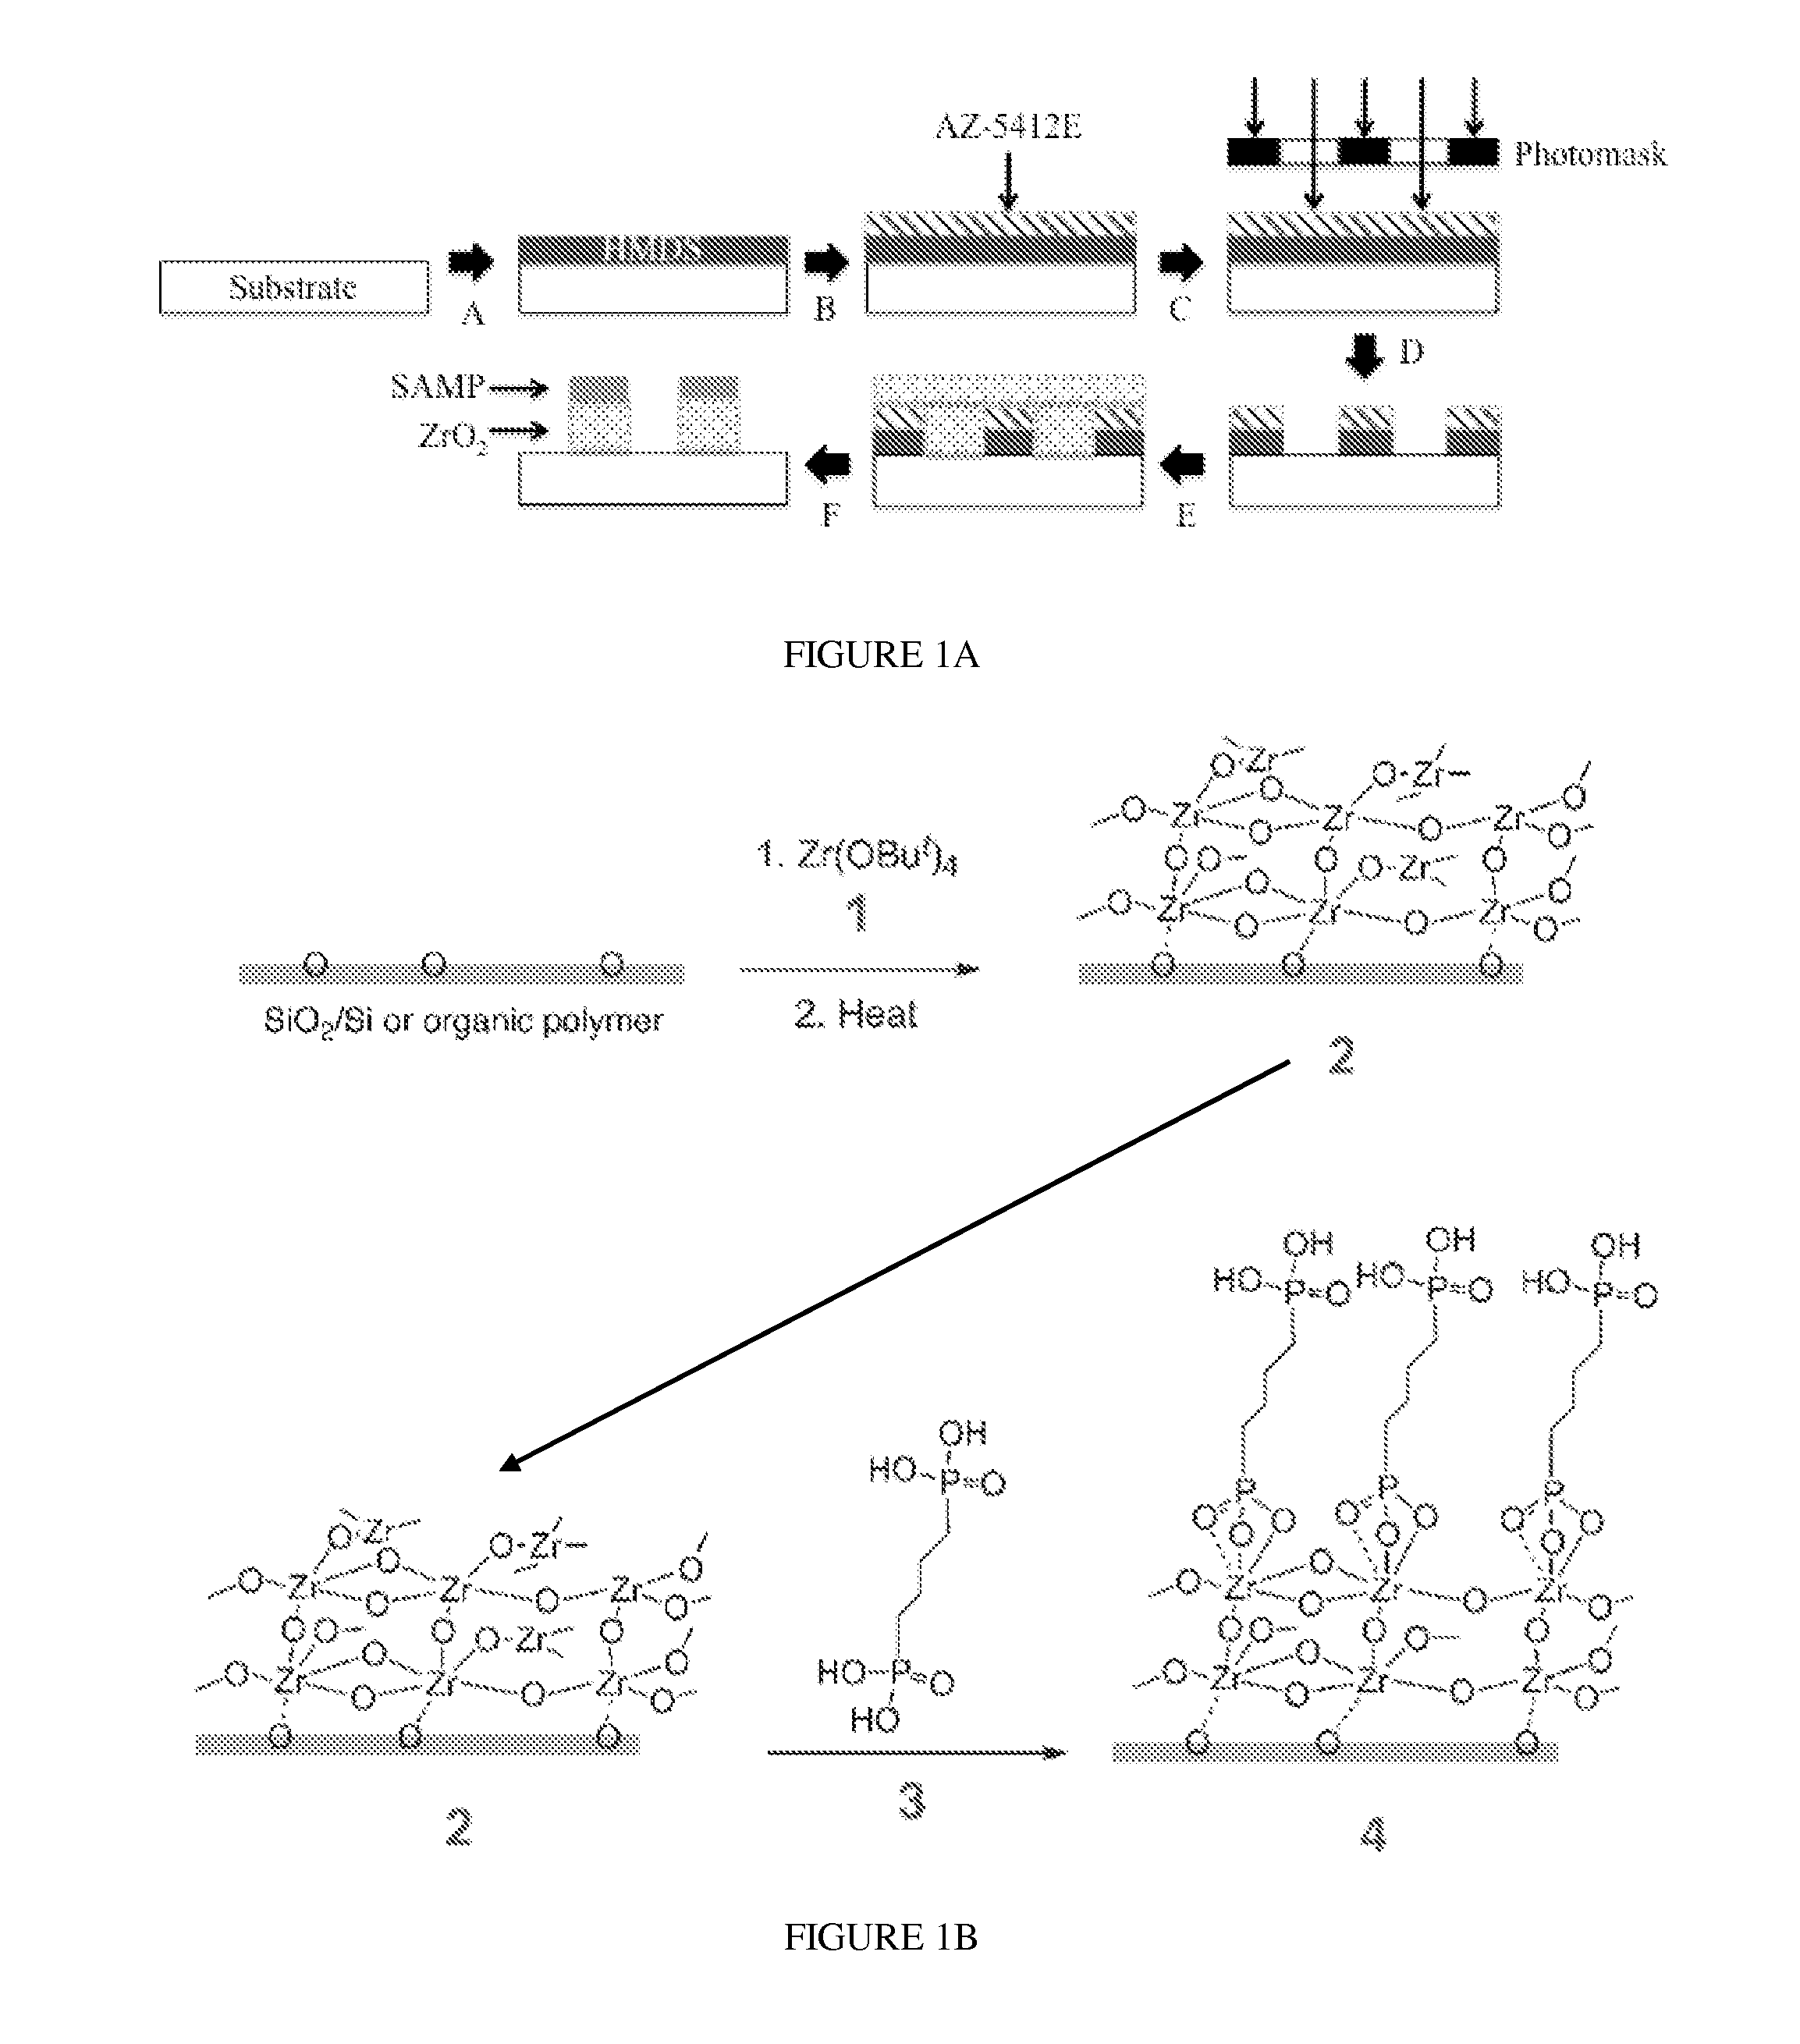 Scaffolds for tissues and uses thereof